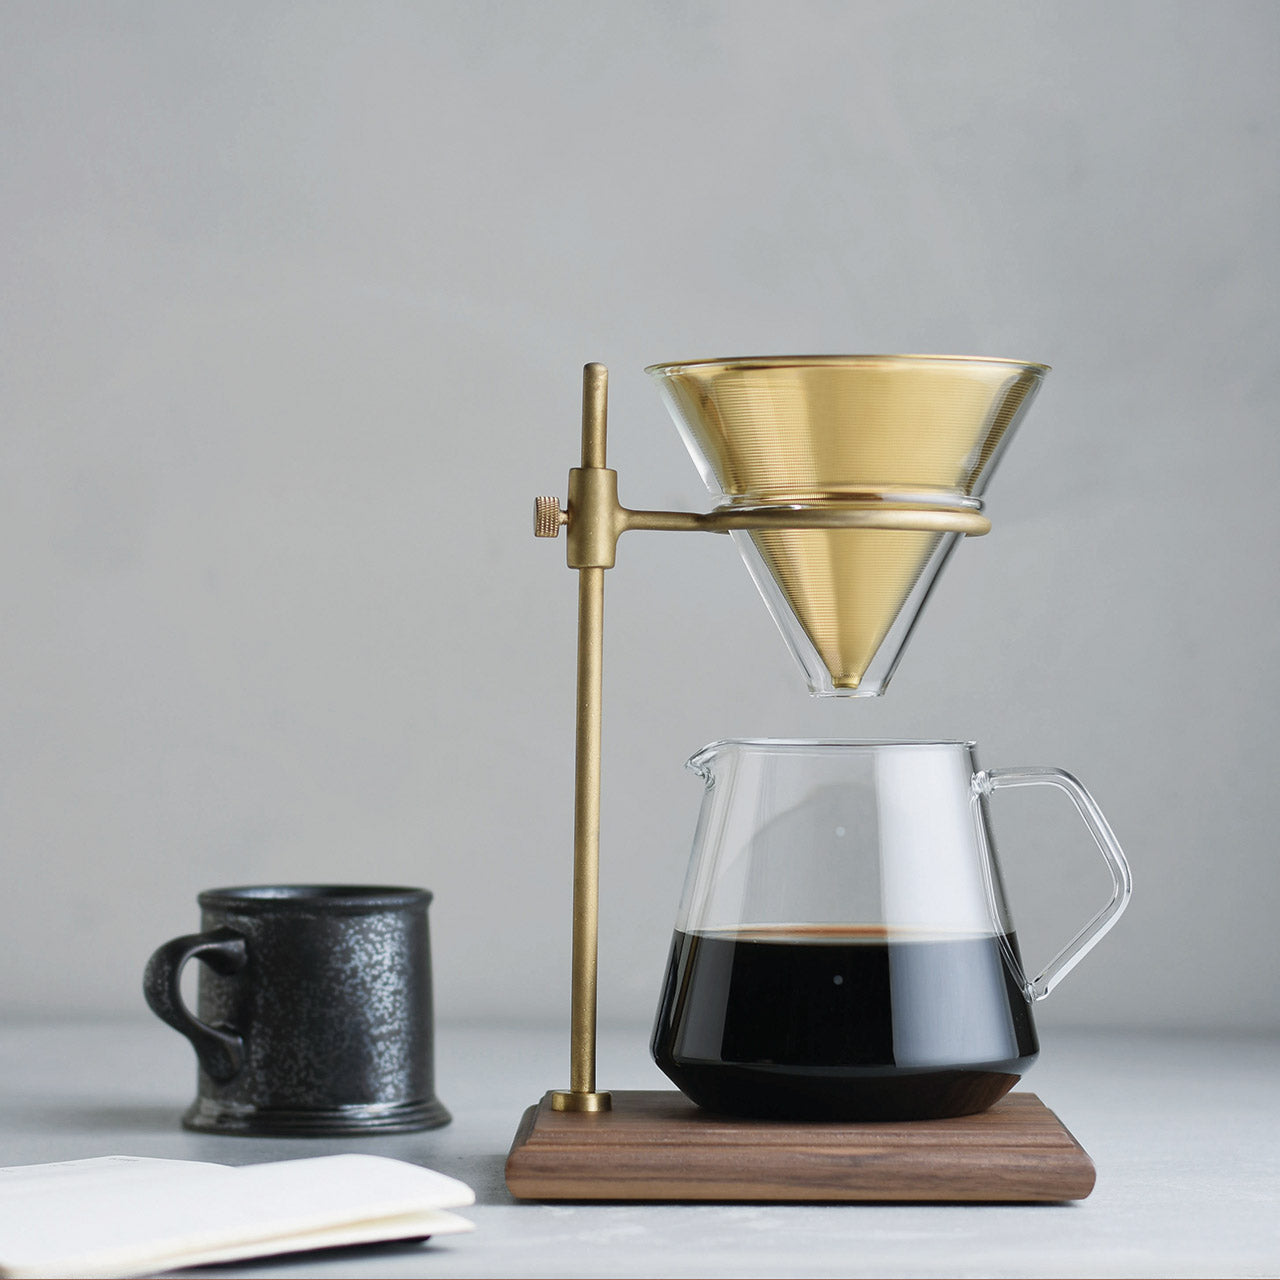 Kinto Pour-over Japanese Coffee Brewer with Brass Stand – zen minded